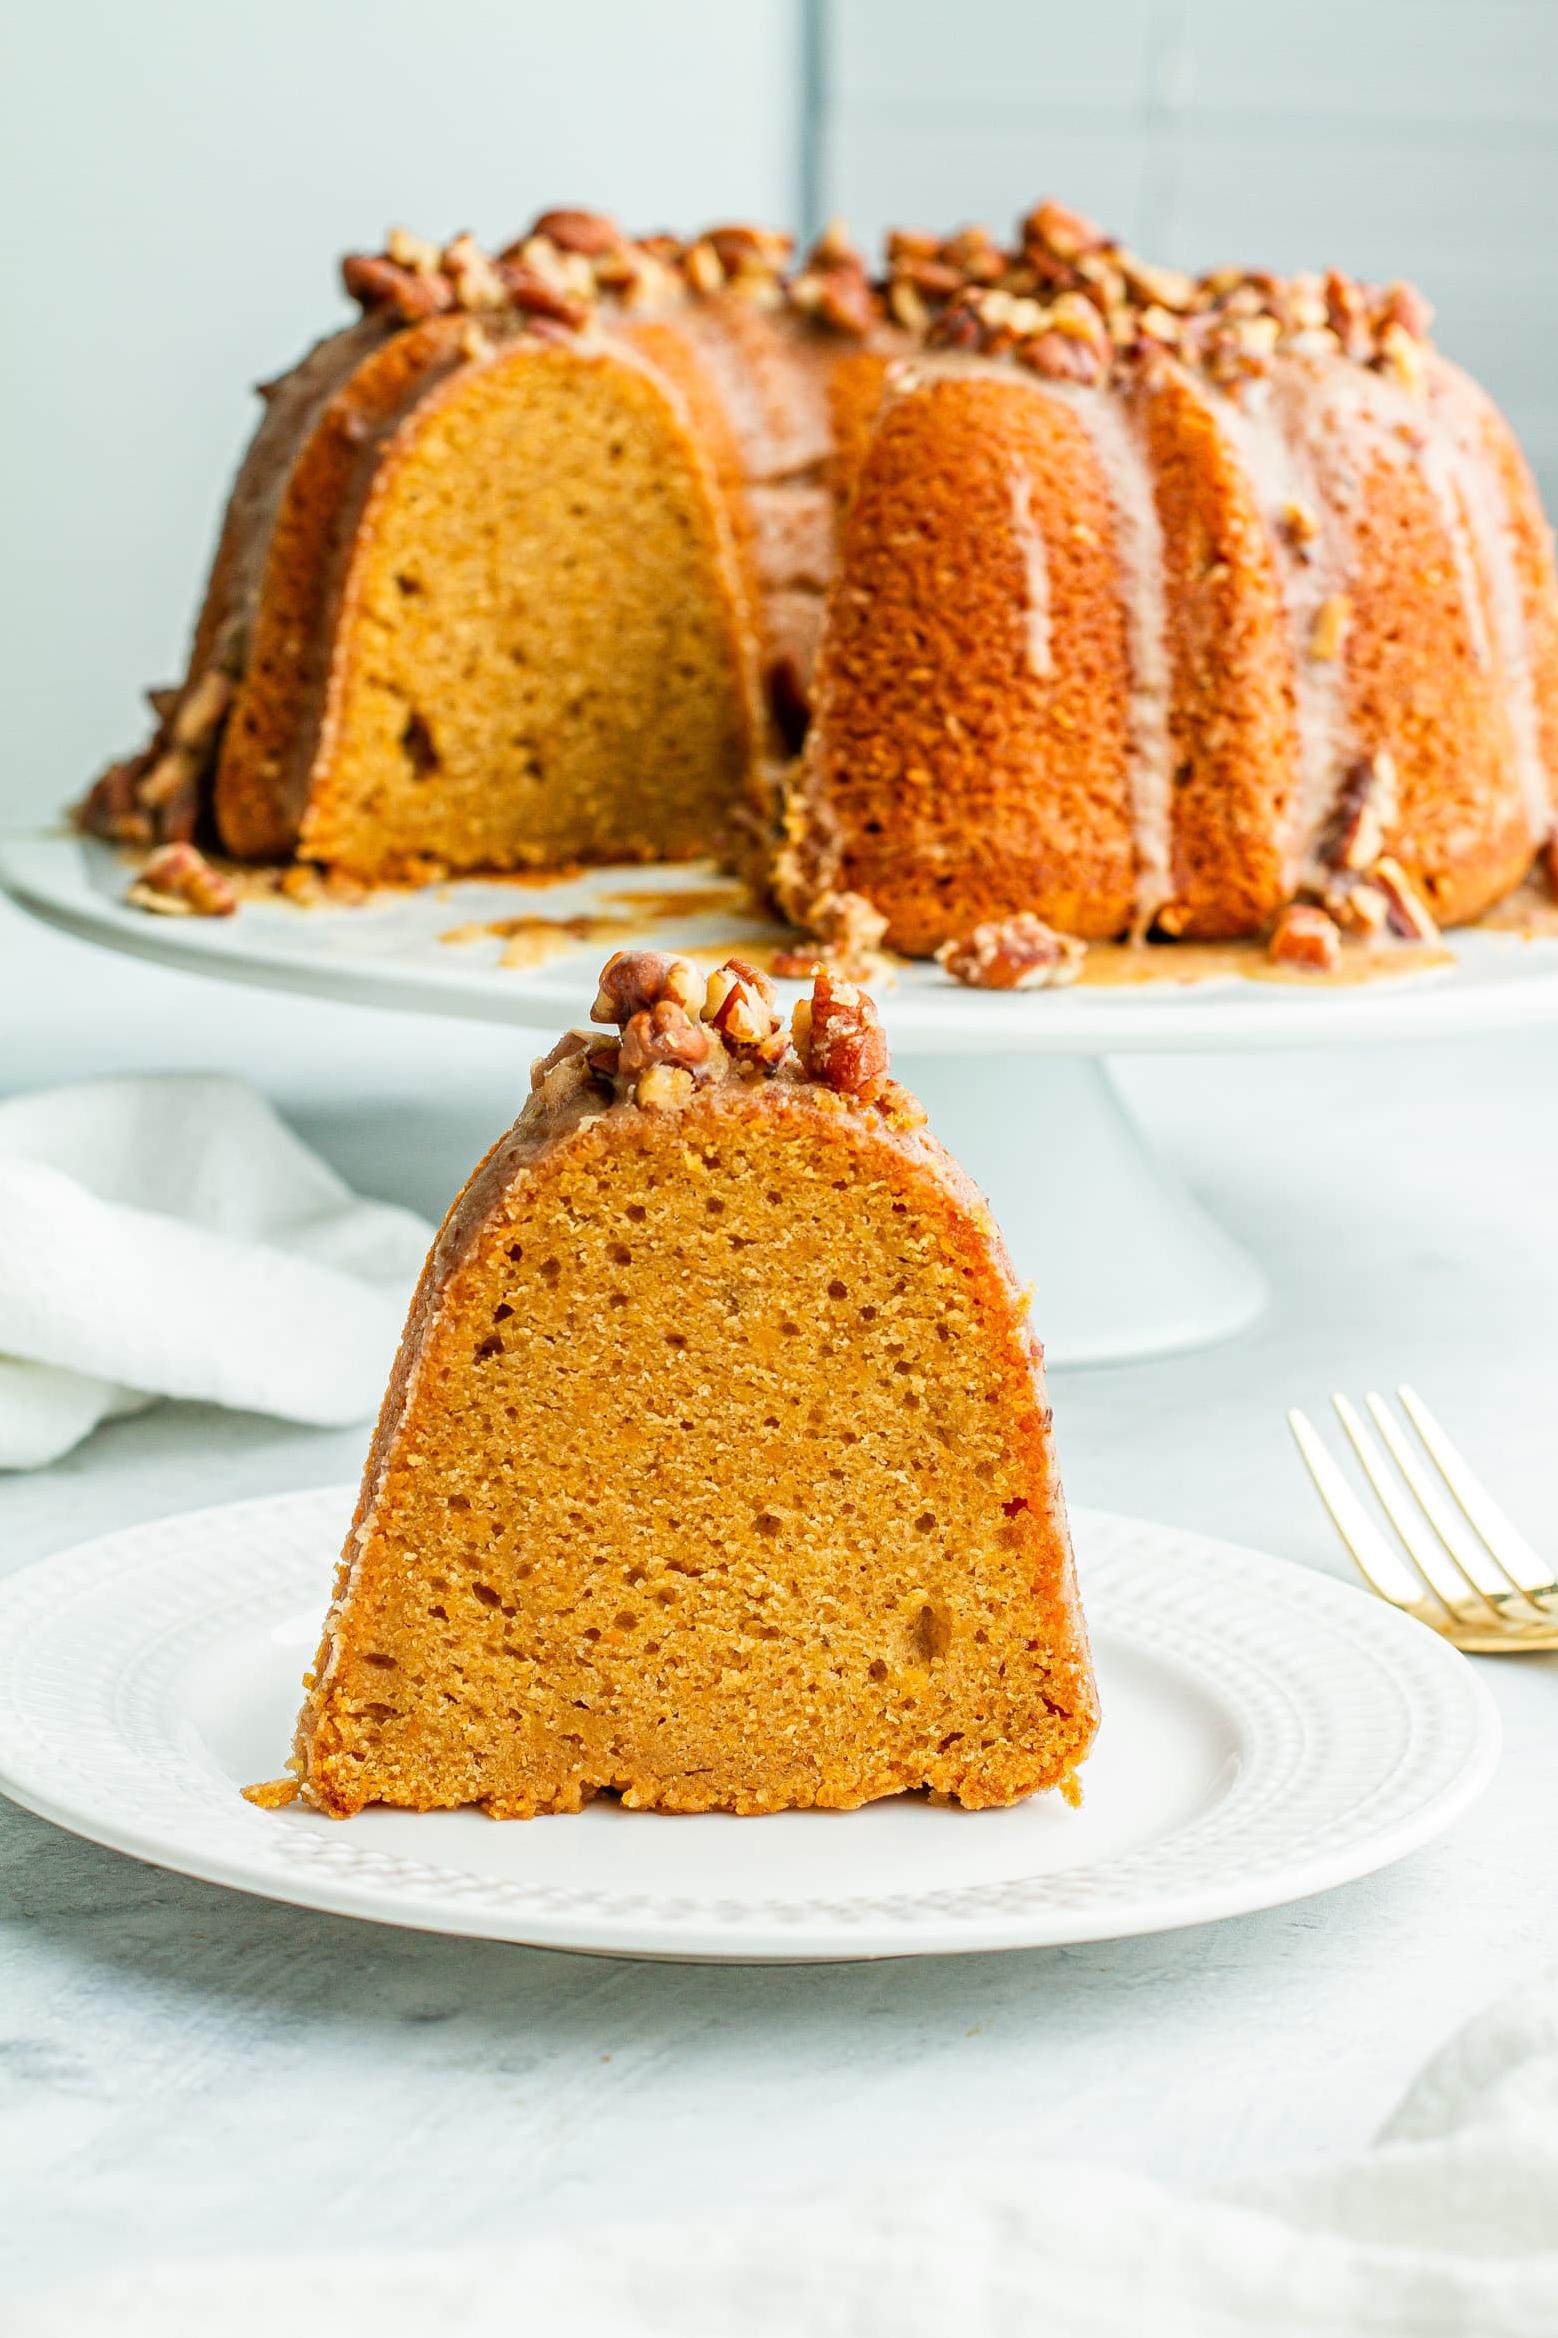  A pound cake that’s sure to transport your taste buds to southern comfort.